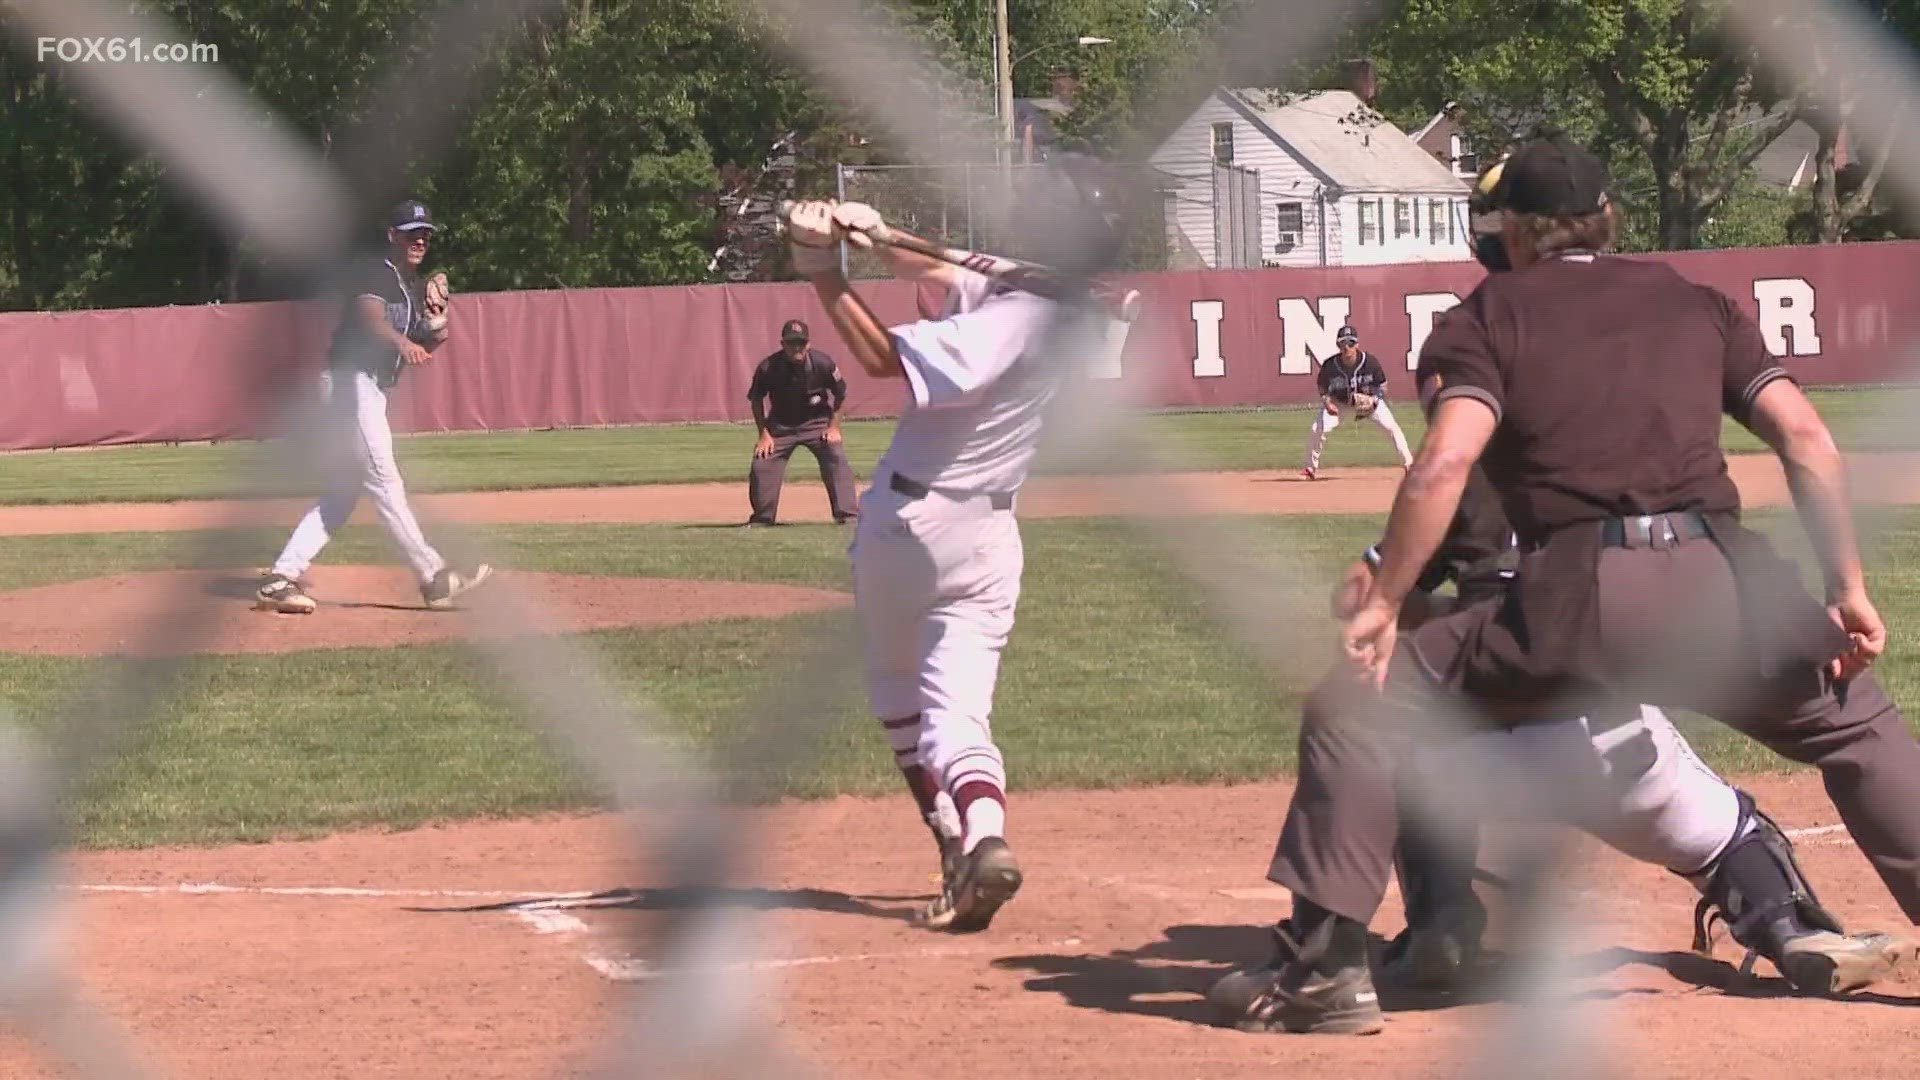 Wilton won 5-0 to advance to the quarterfinals and Windsor won 4-2 in extra innings to advance to the quarterfinals.